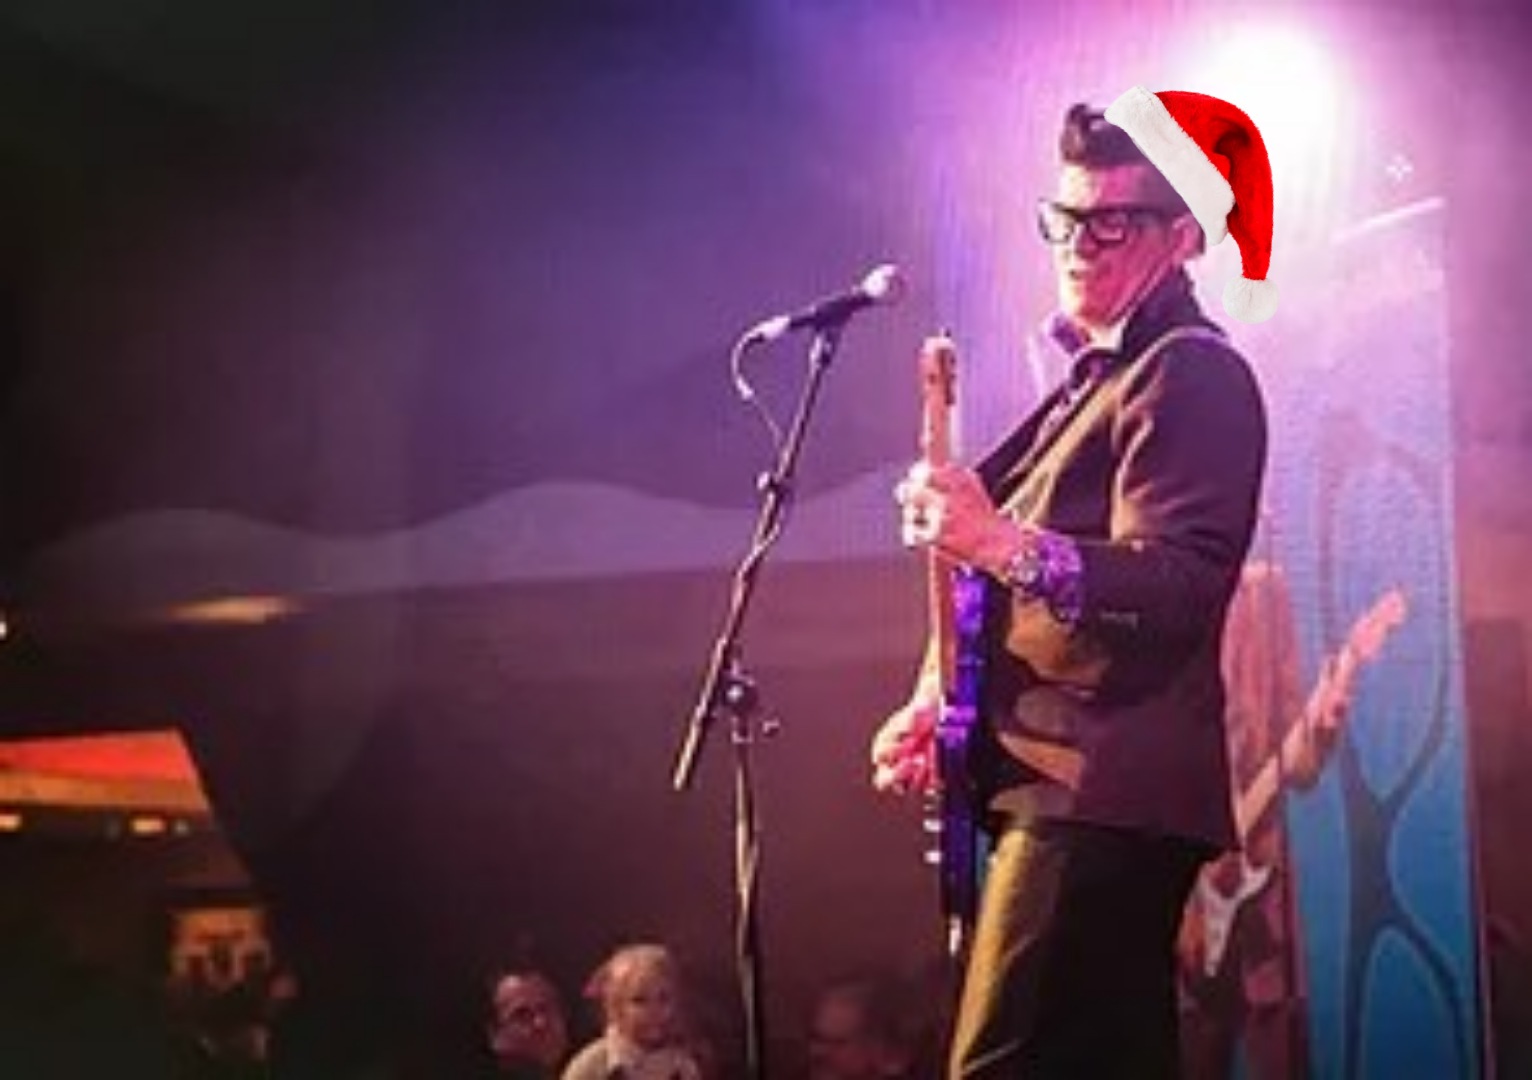 Entertainer extraordinaire: MR JOHNNY ROGERS AND HIS ROCKIN CHRISTMAS  SHOW!